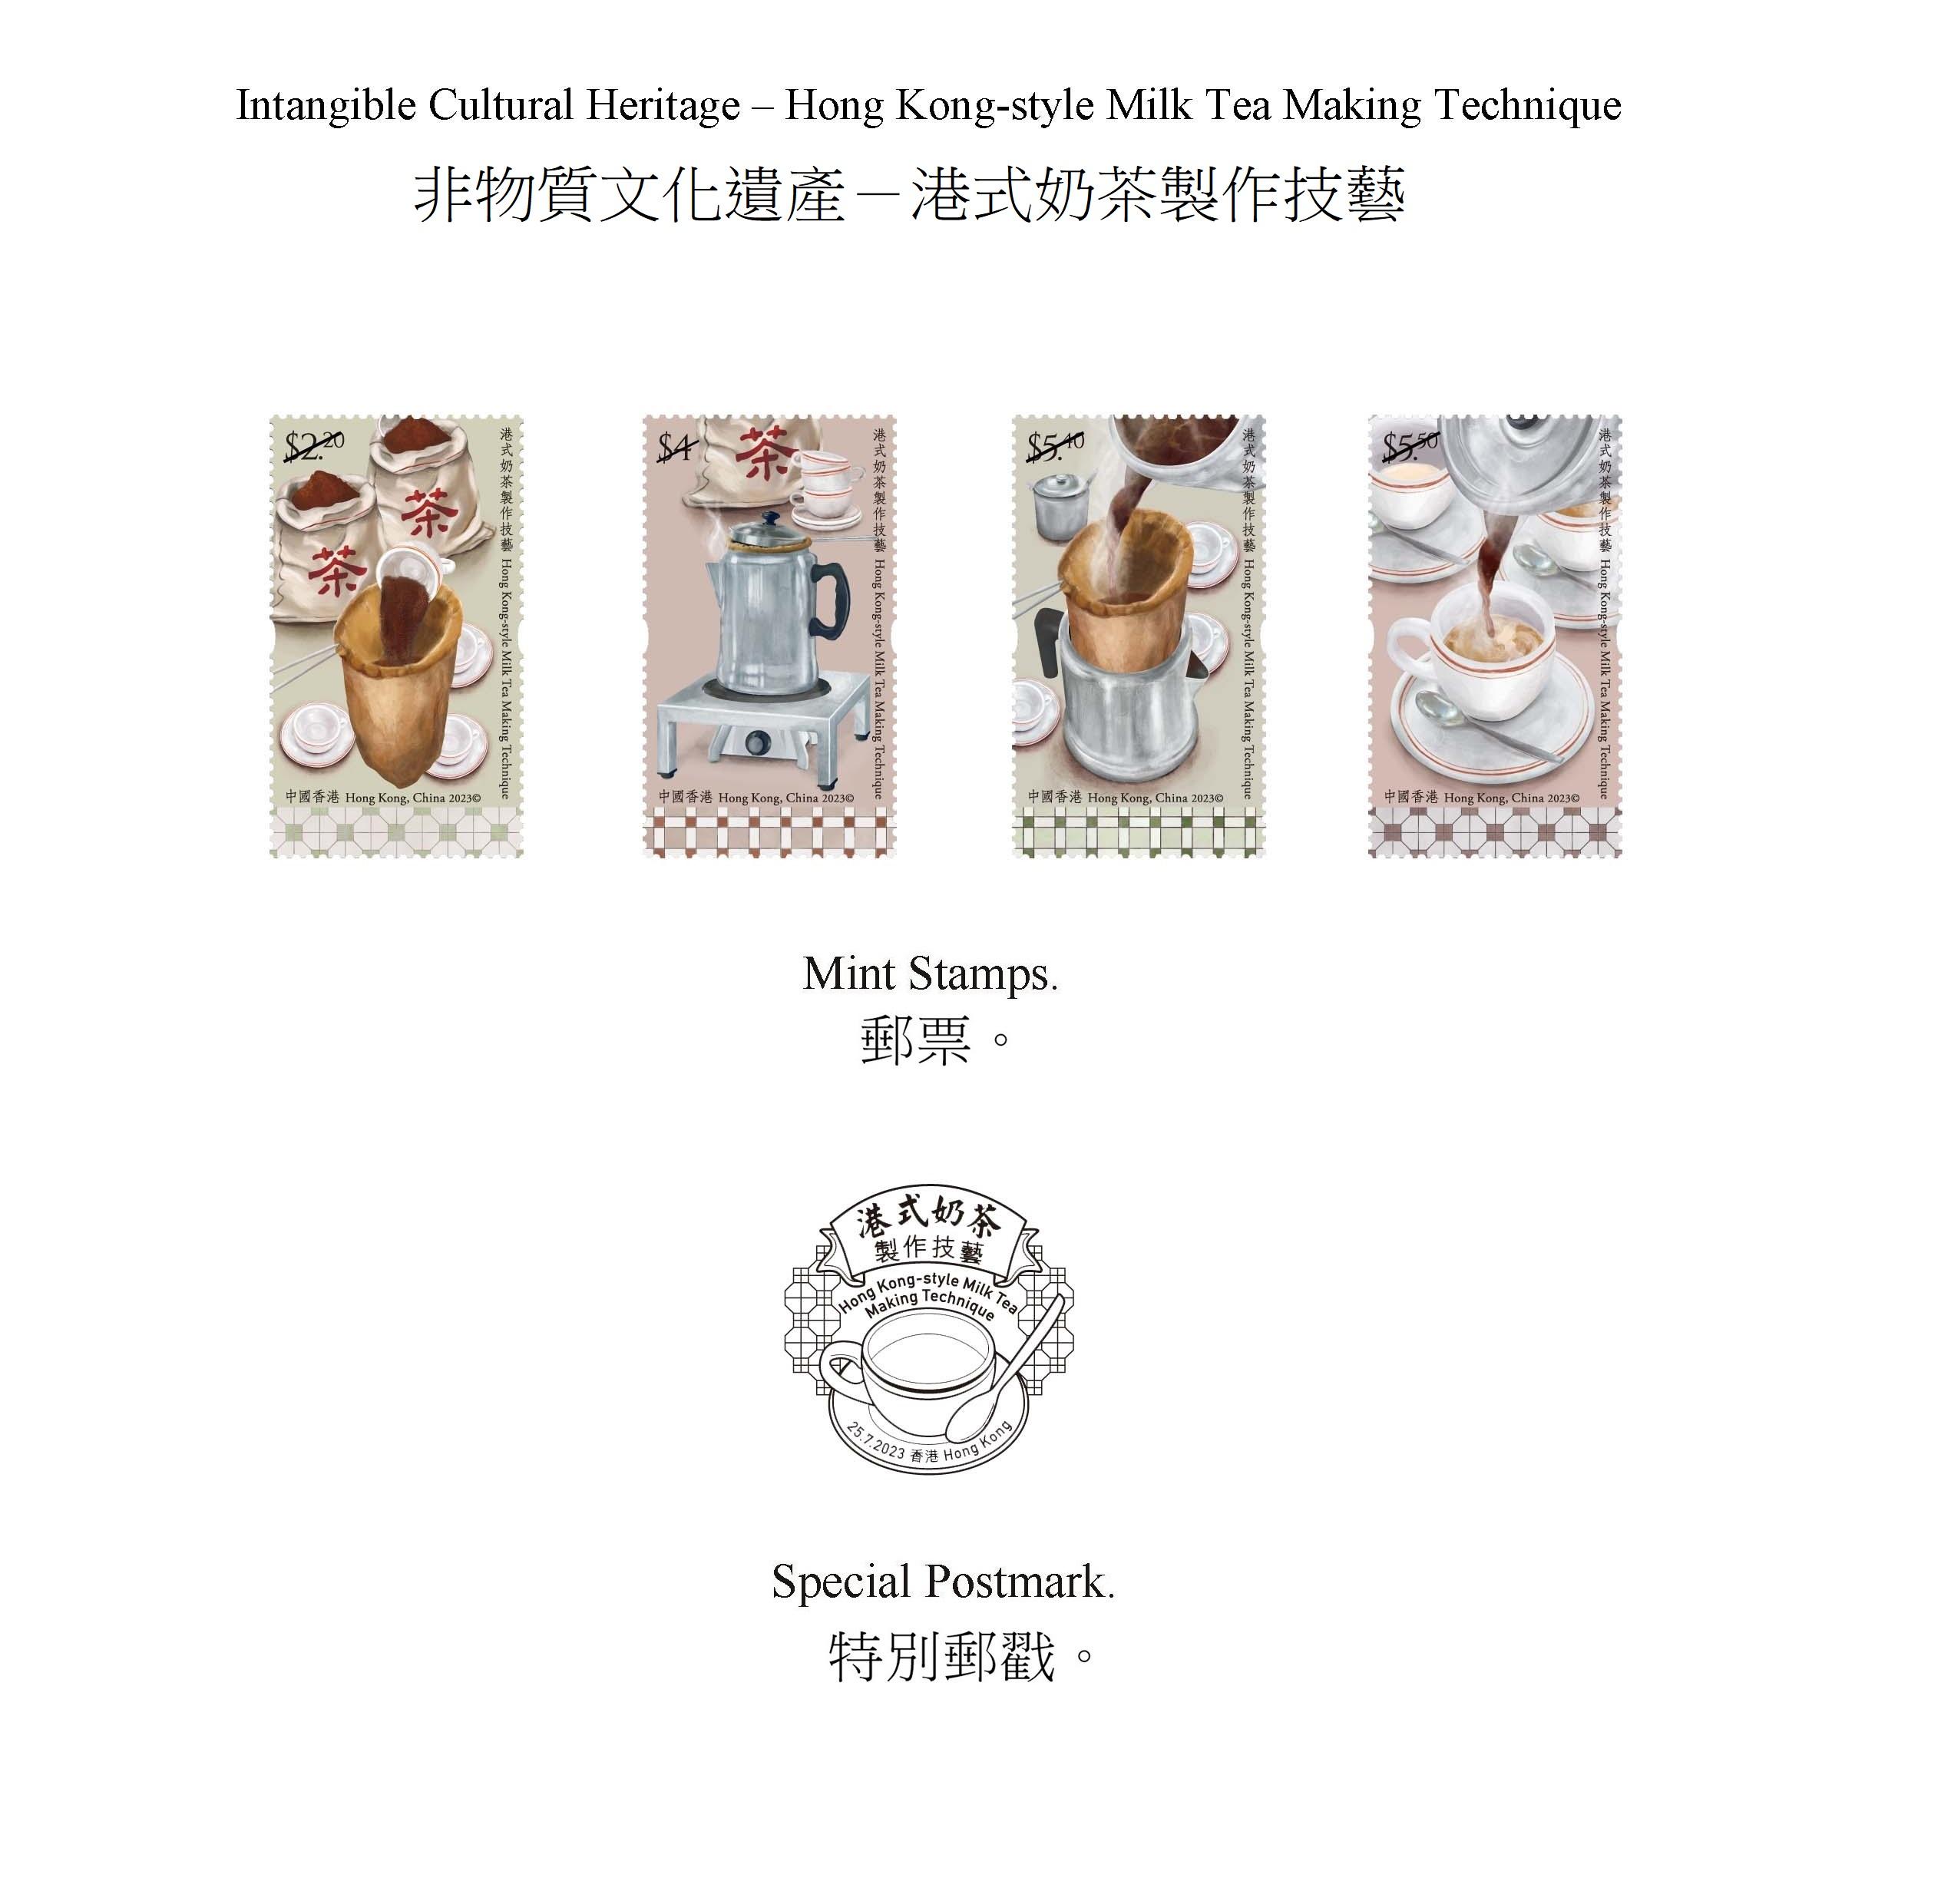 Hongkong Post will launch a special stamp issue and associated philatelic products on the theme of "Intangible Cultural Heritage - Hong Kong-style Milk Tea Making Technique" on July 25 (Tuesday). Photos show the mint stamps and the special postmark.

